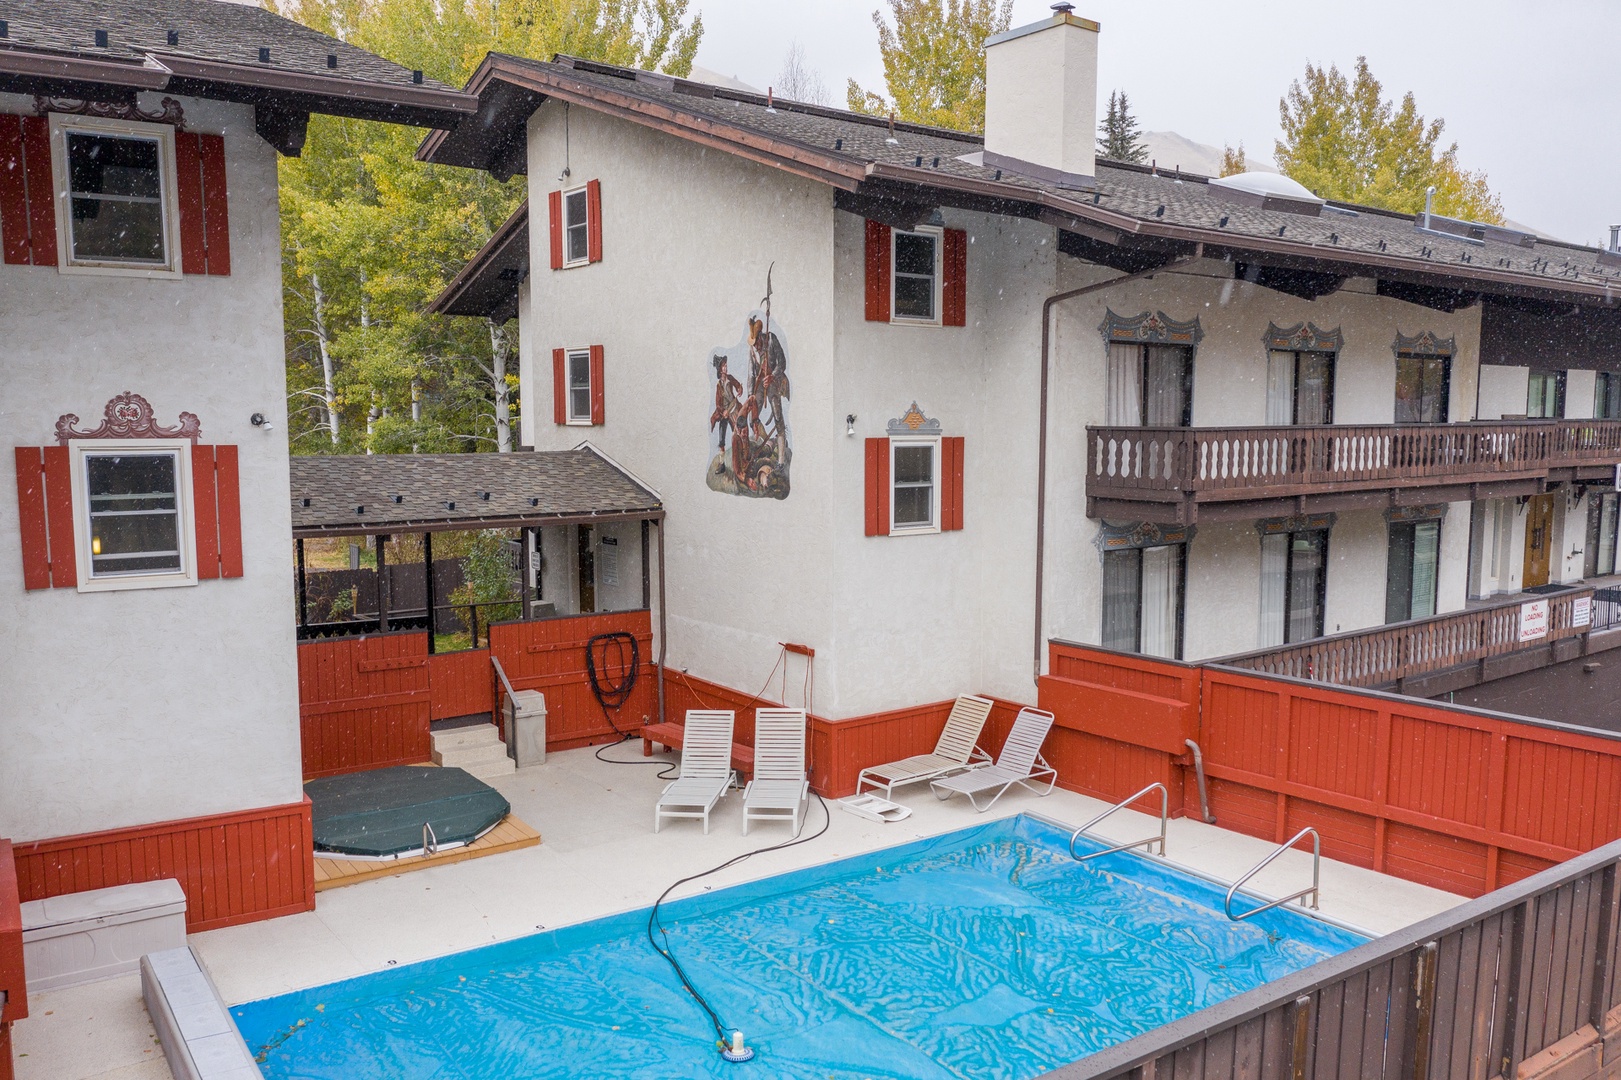 Ketchum Vacation Rentals, Bavarian Warm Springs Charm - Pool for relaxing summer days